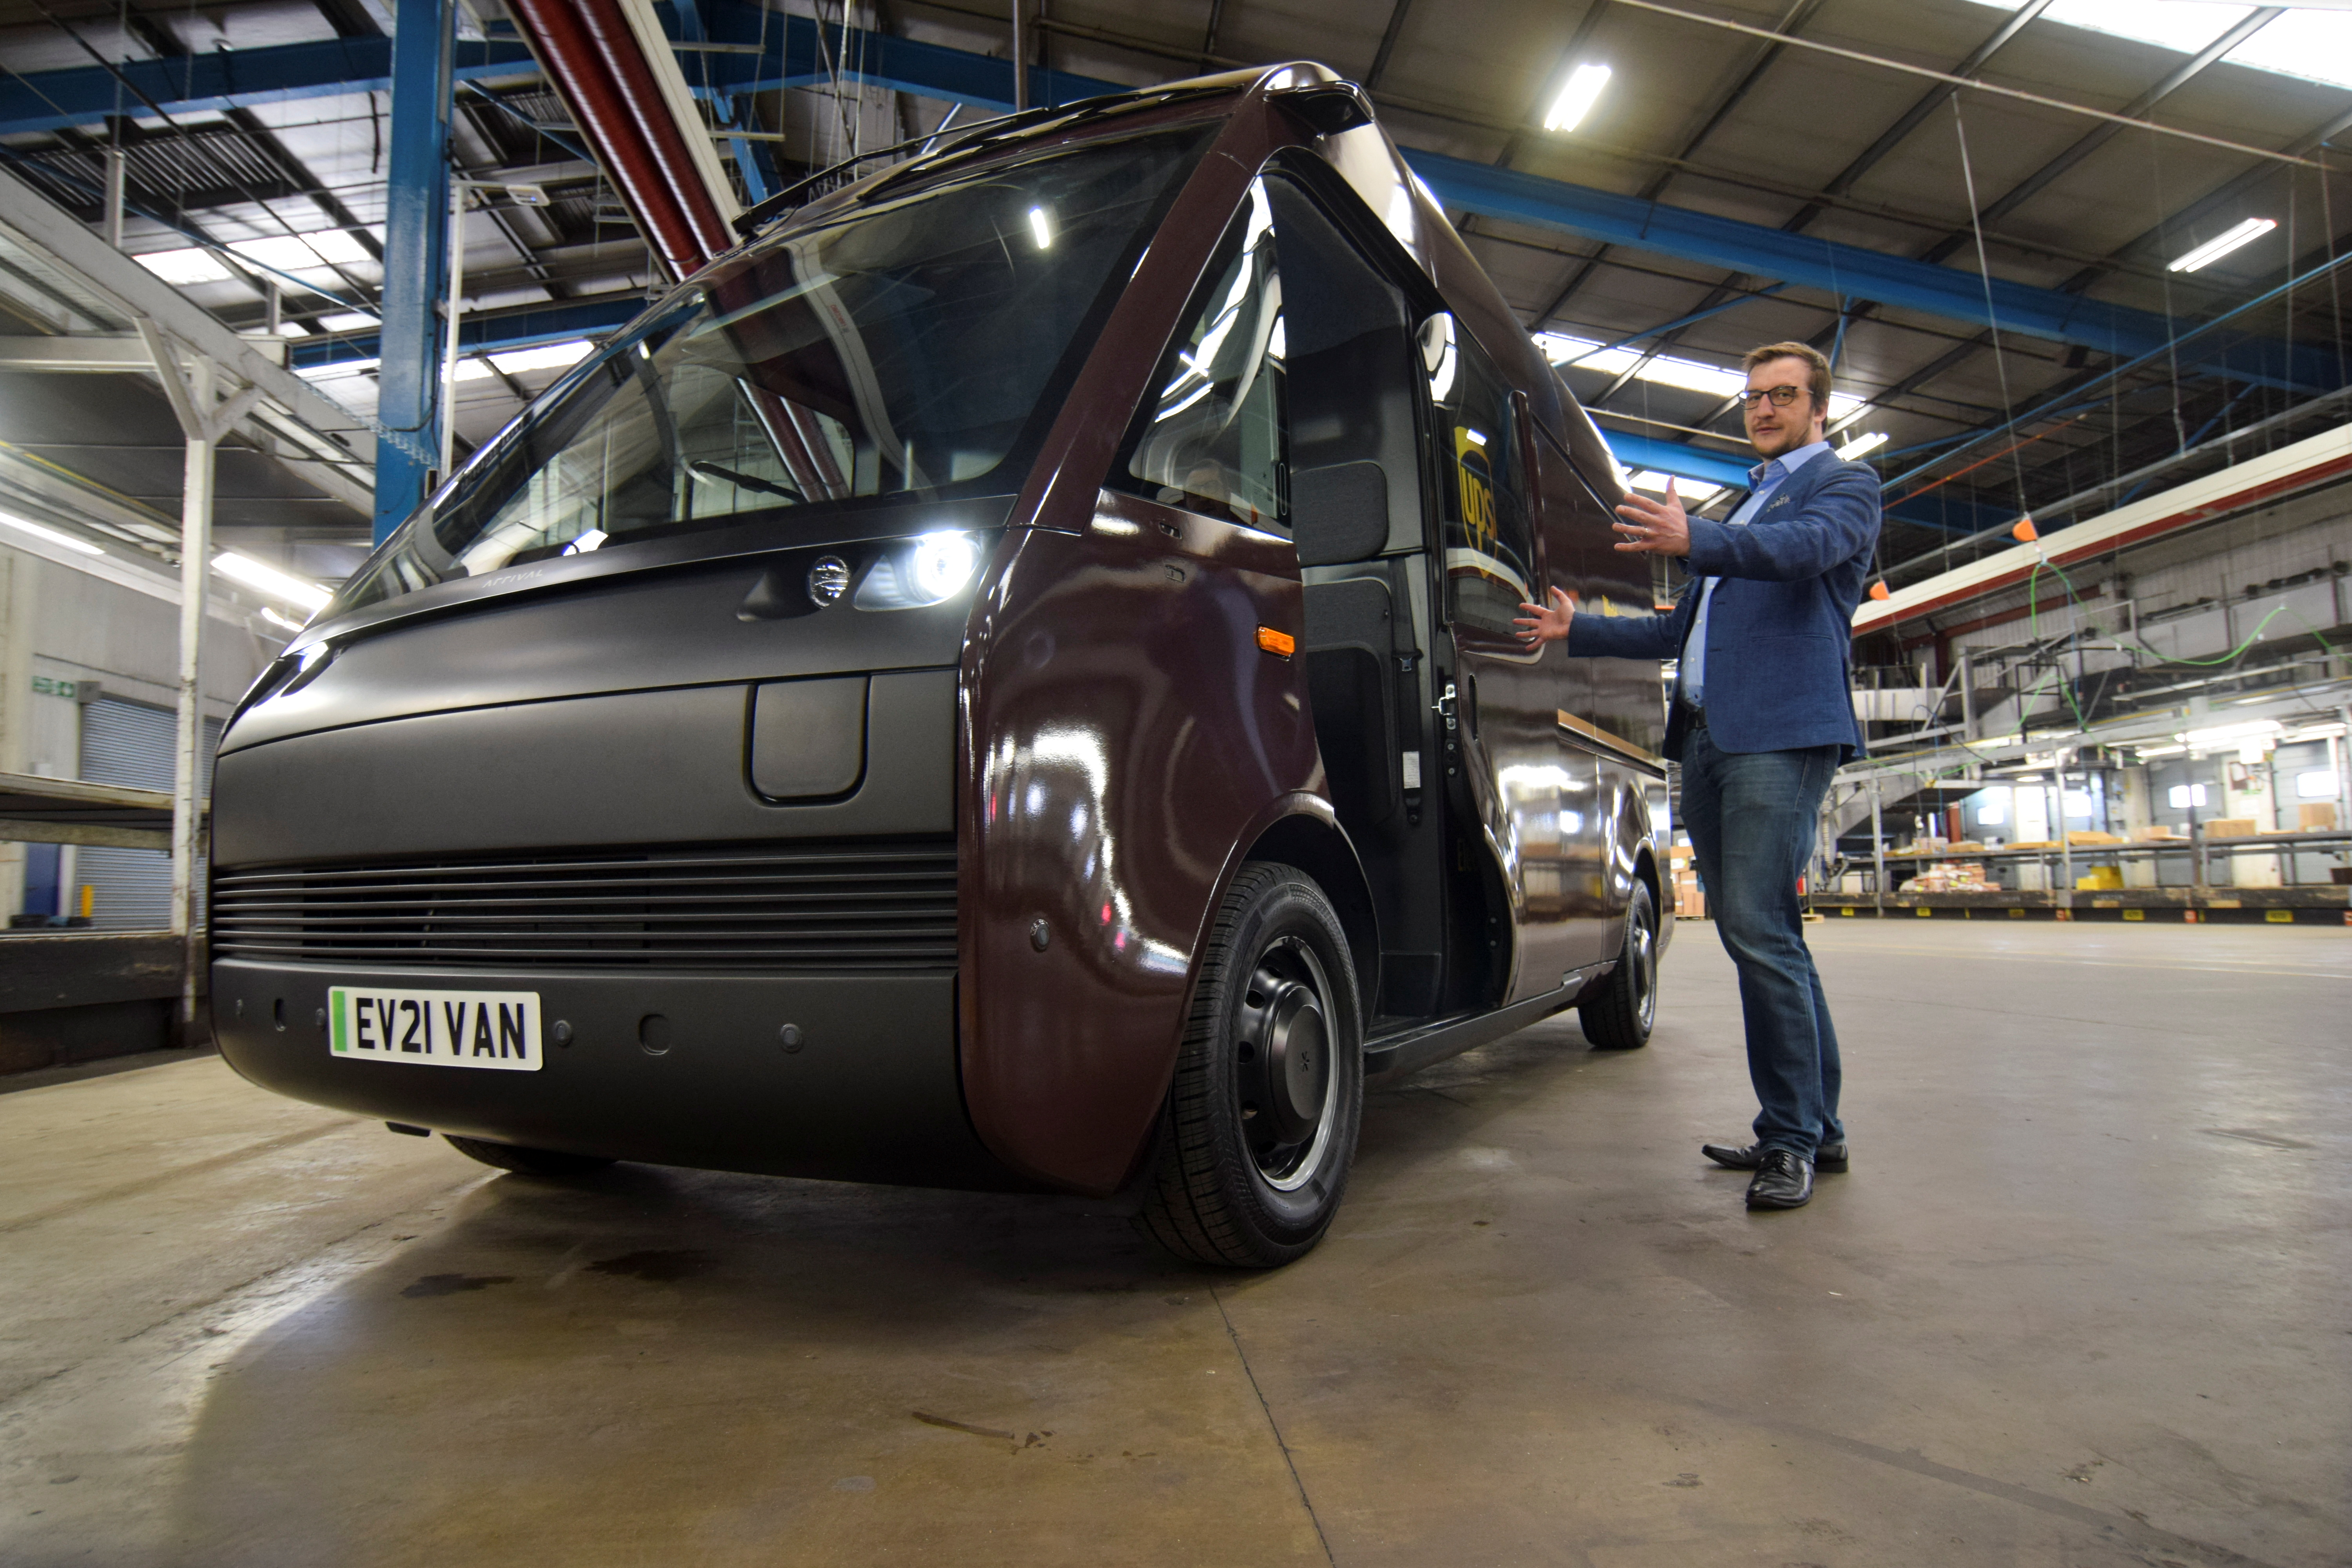 Luke Wake, UPS vice president of maintenance and engineering, demonstrates features on a test model of a fully-electric Arrival van, in London